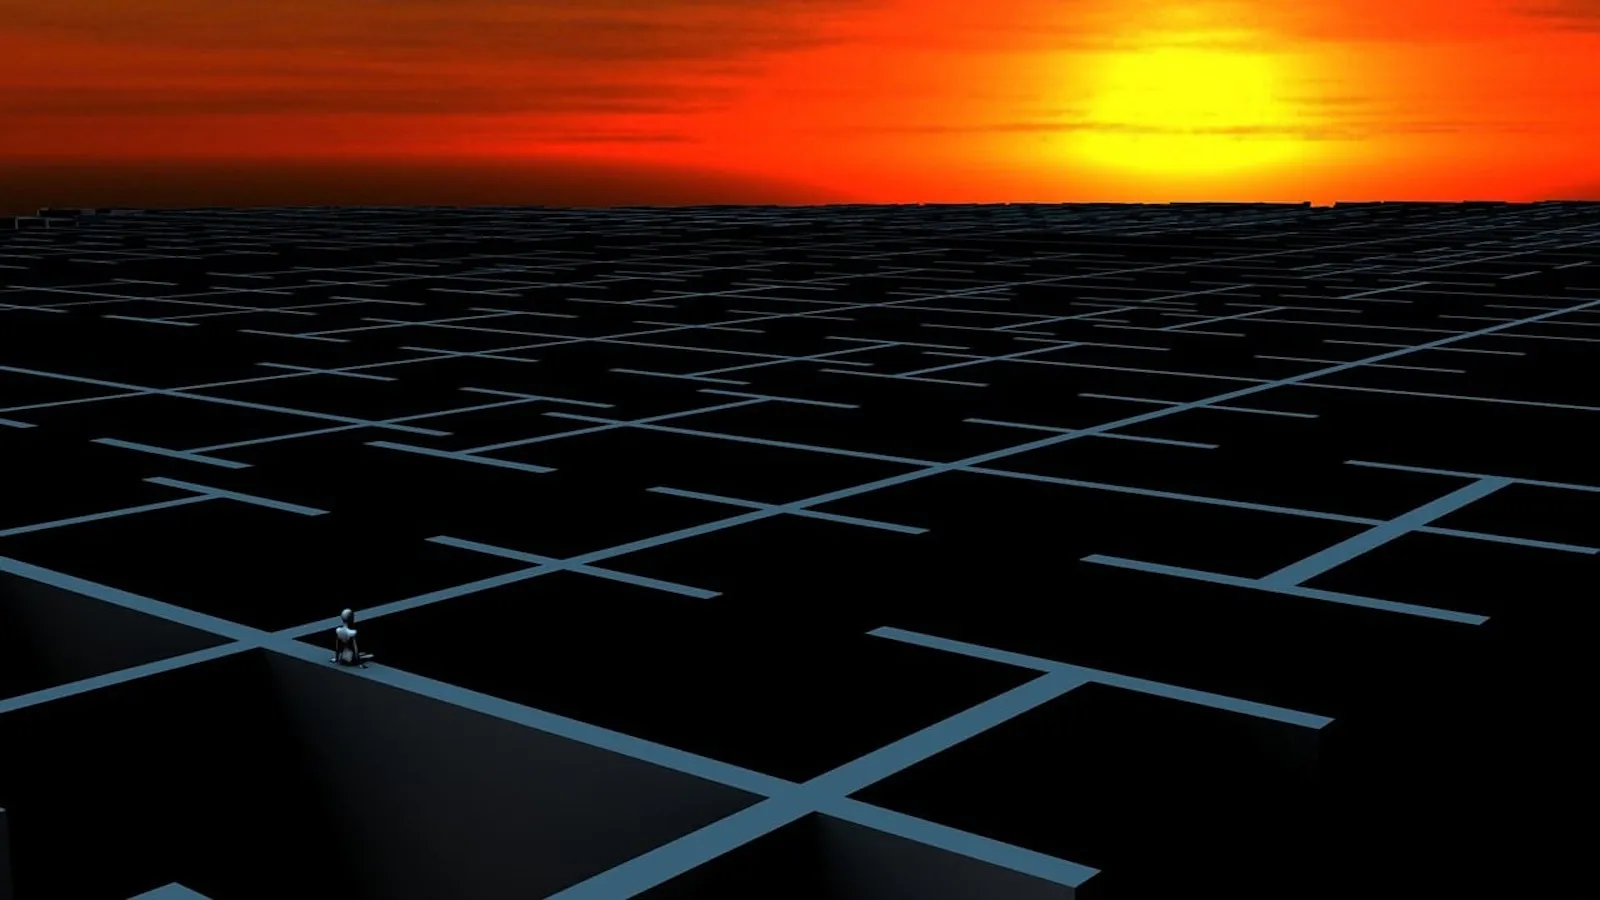 Image of a computer-generated maze with a sunset in the background, symbolizing longing and the desire to break free from the cycle of existence.